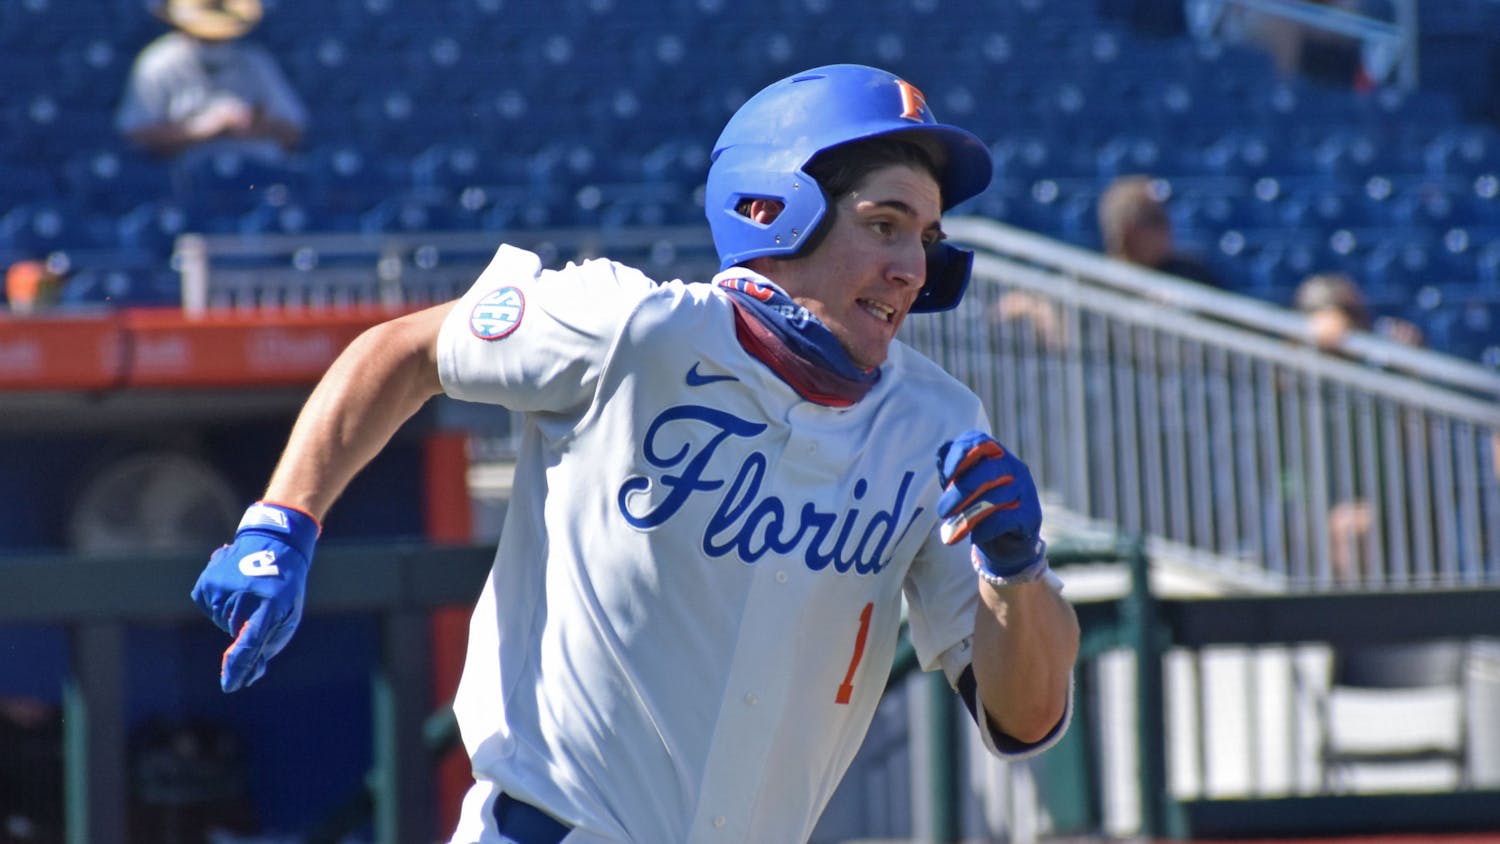 No. 15 Florida took down Auburn 4-2 in the series opener Friday night and extended its win streak to a season-long seven games. Photo from UF-Jacksonville game March 14.